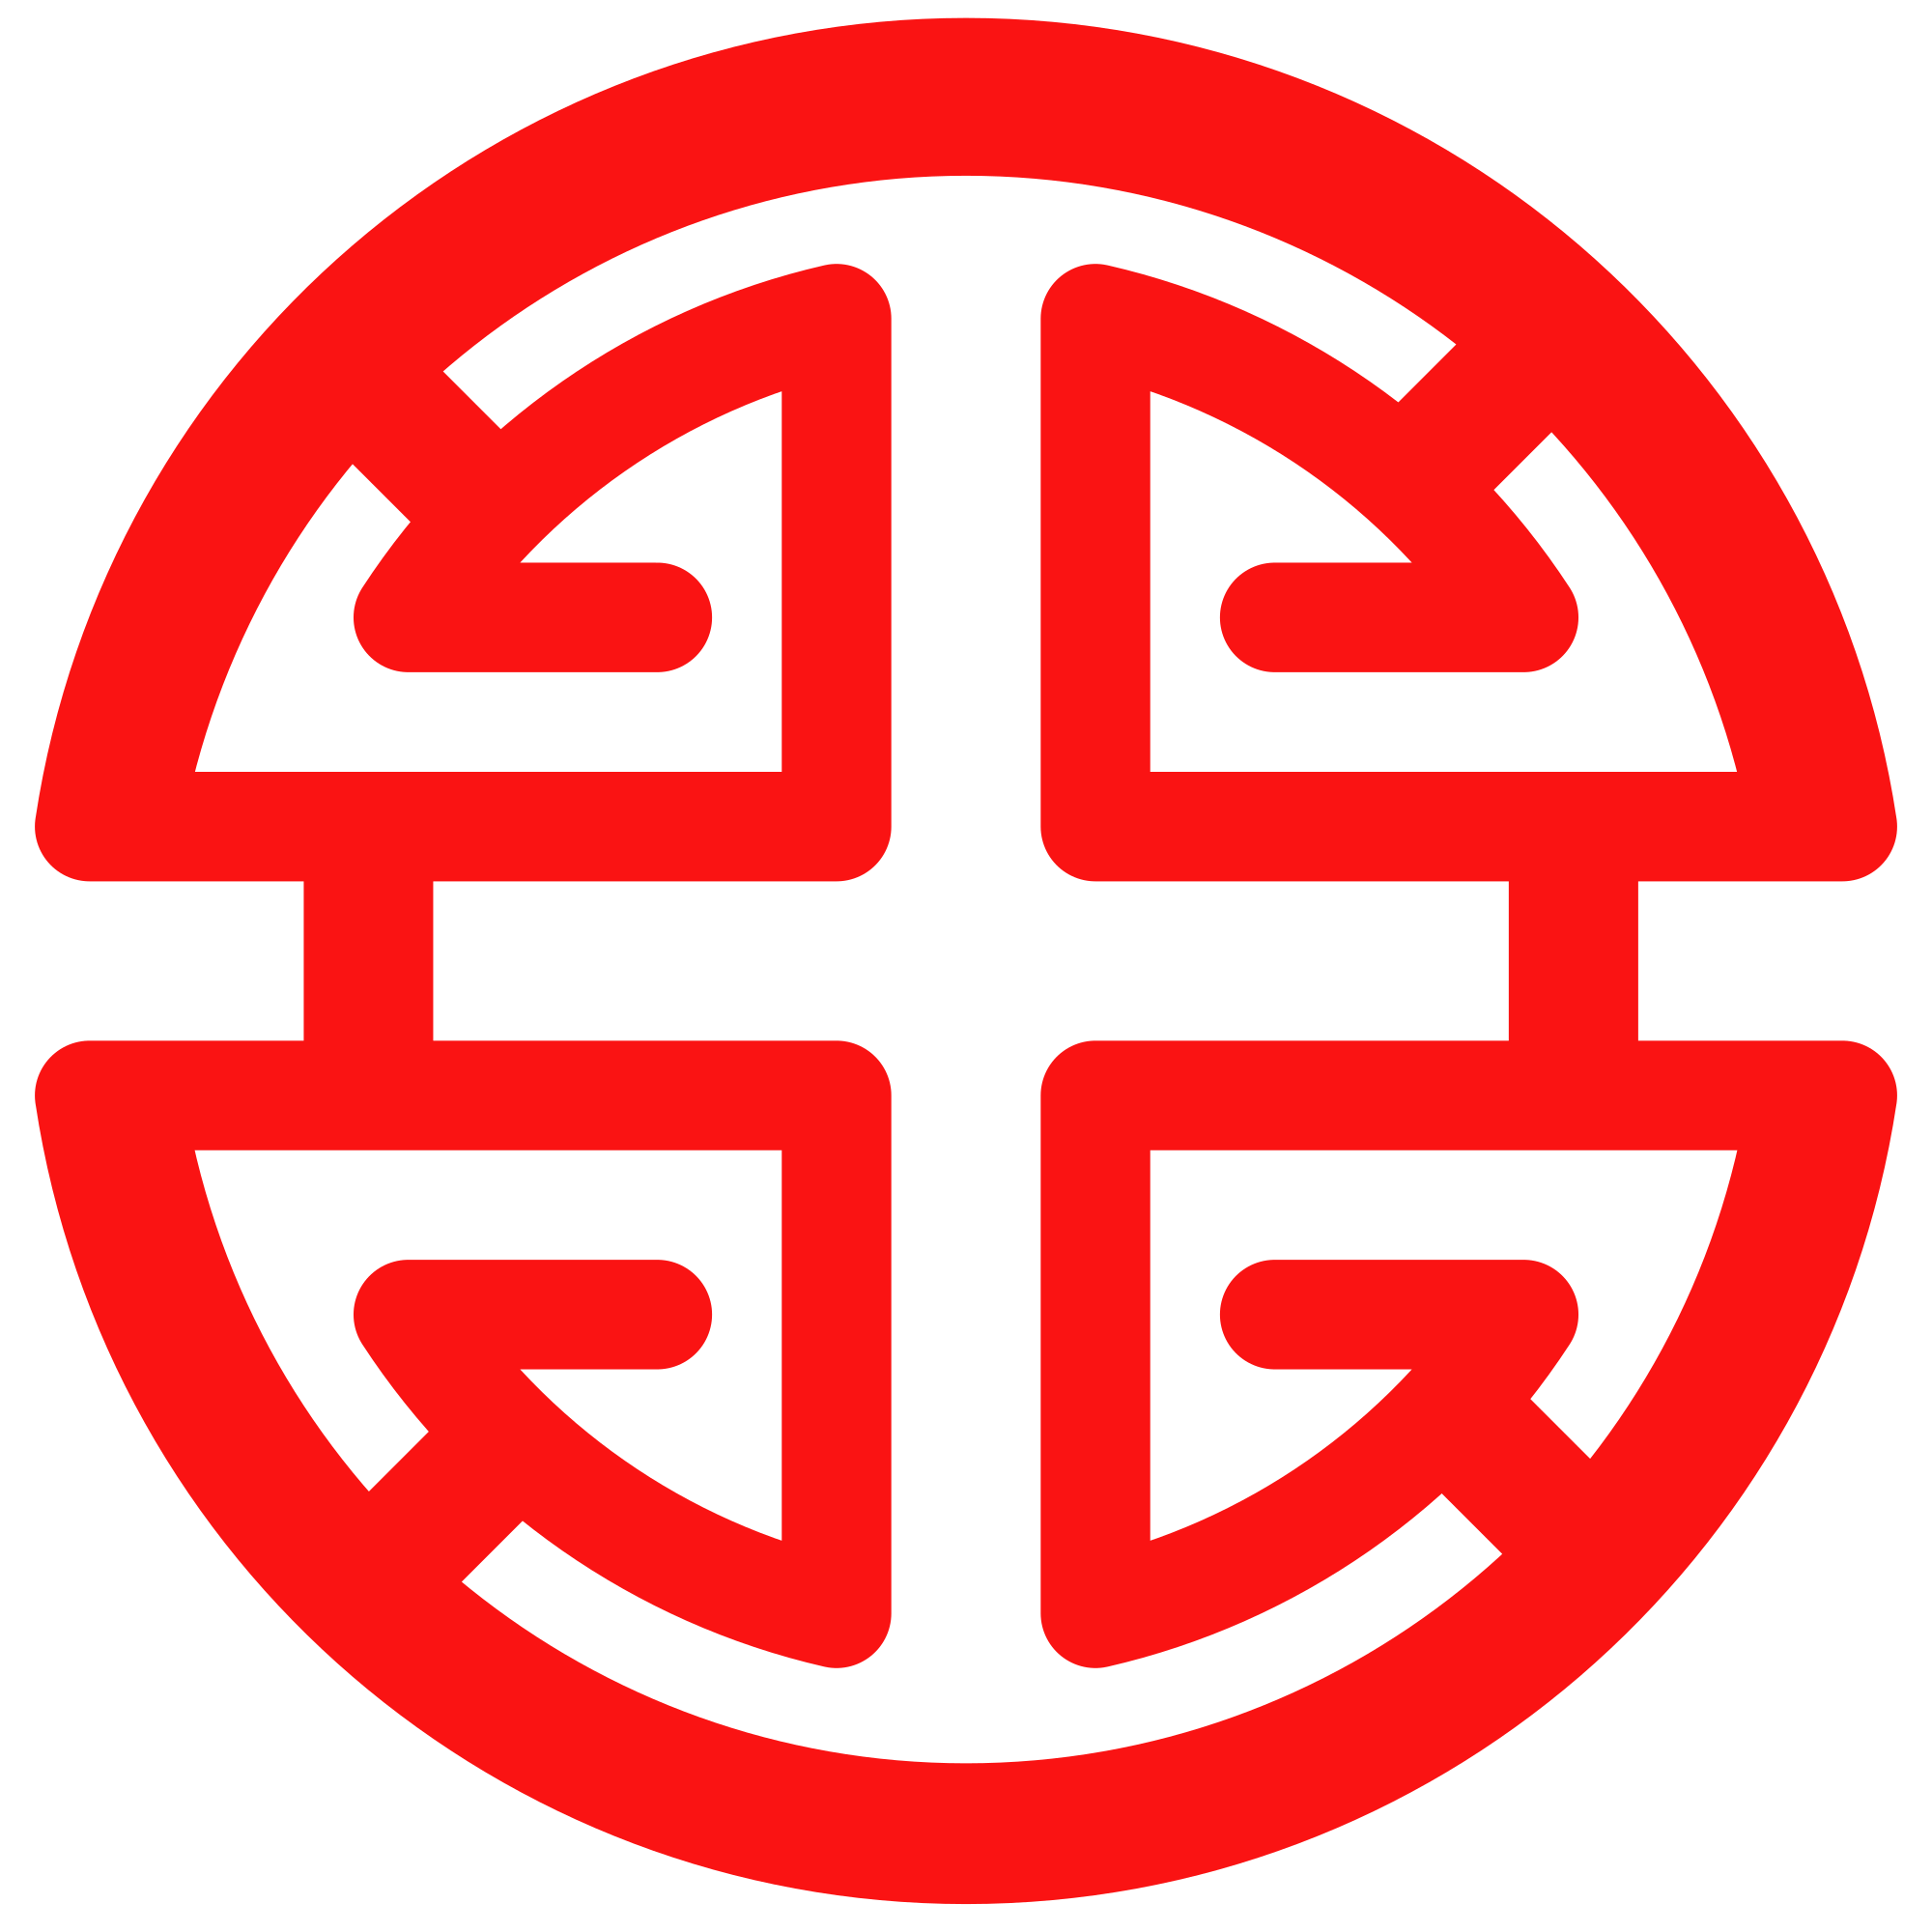 All Chinese Logo - File:禄 lù or 子 zi symbol---red.svg - Wikimedia Commons